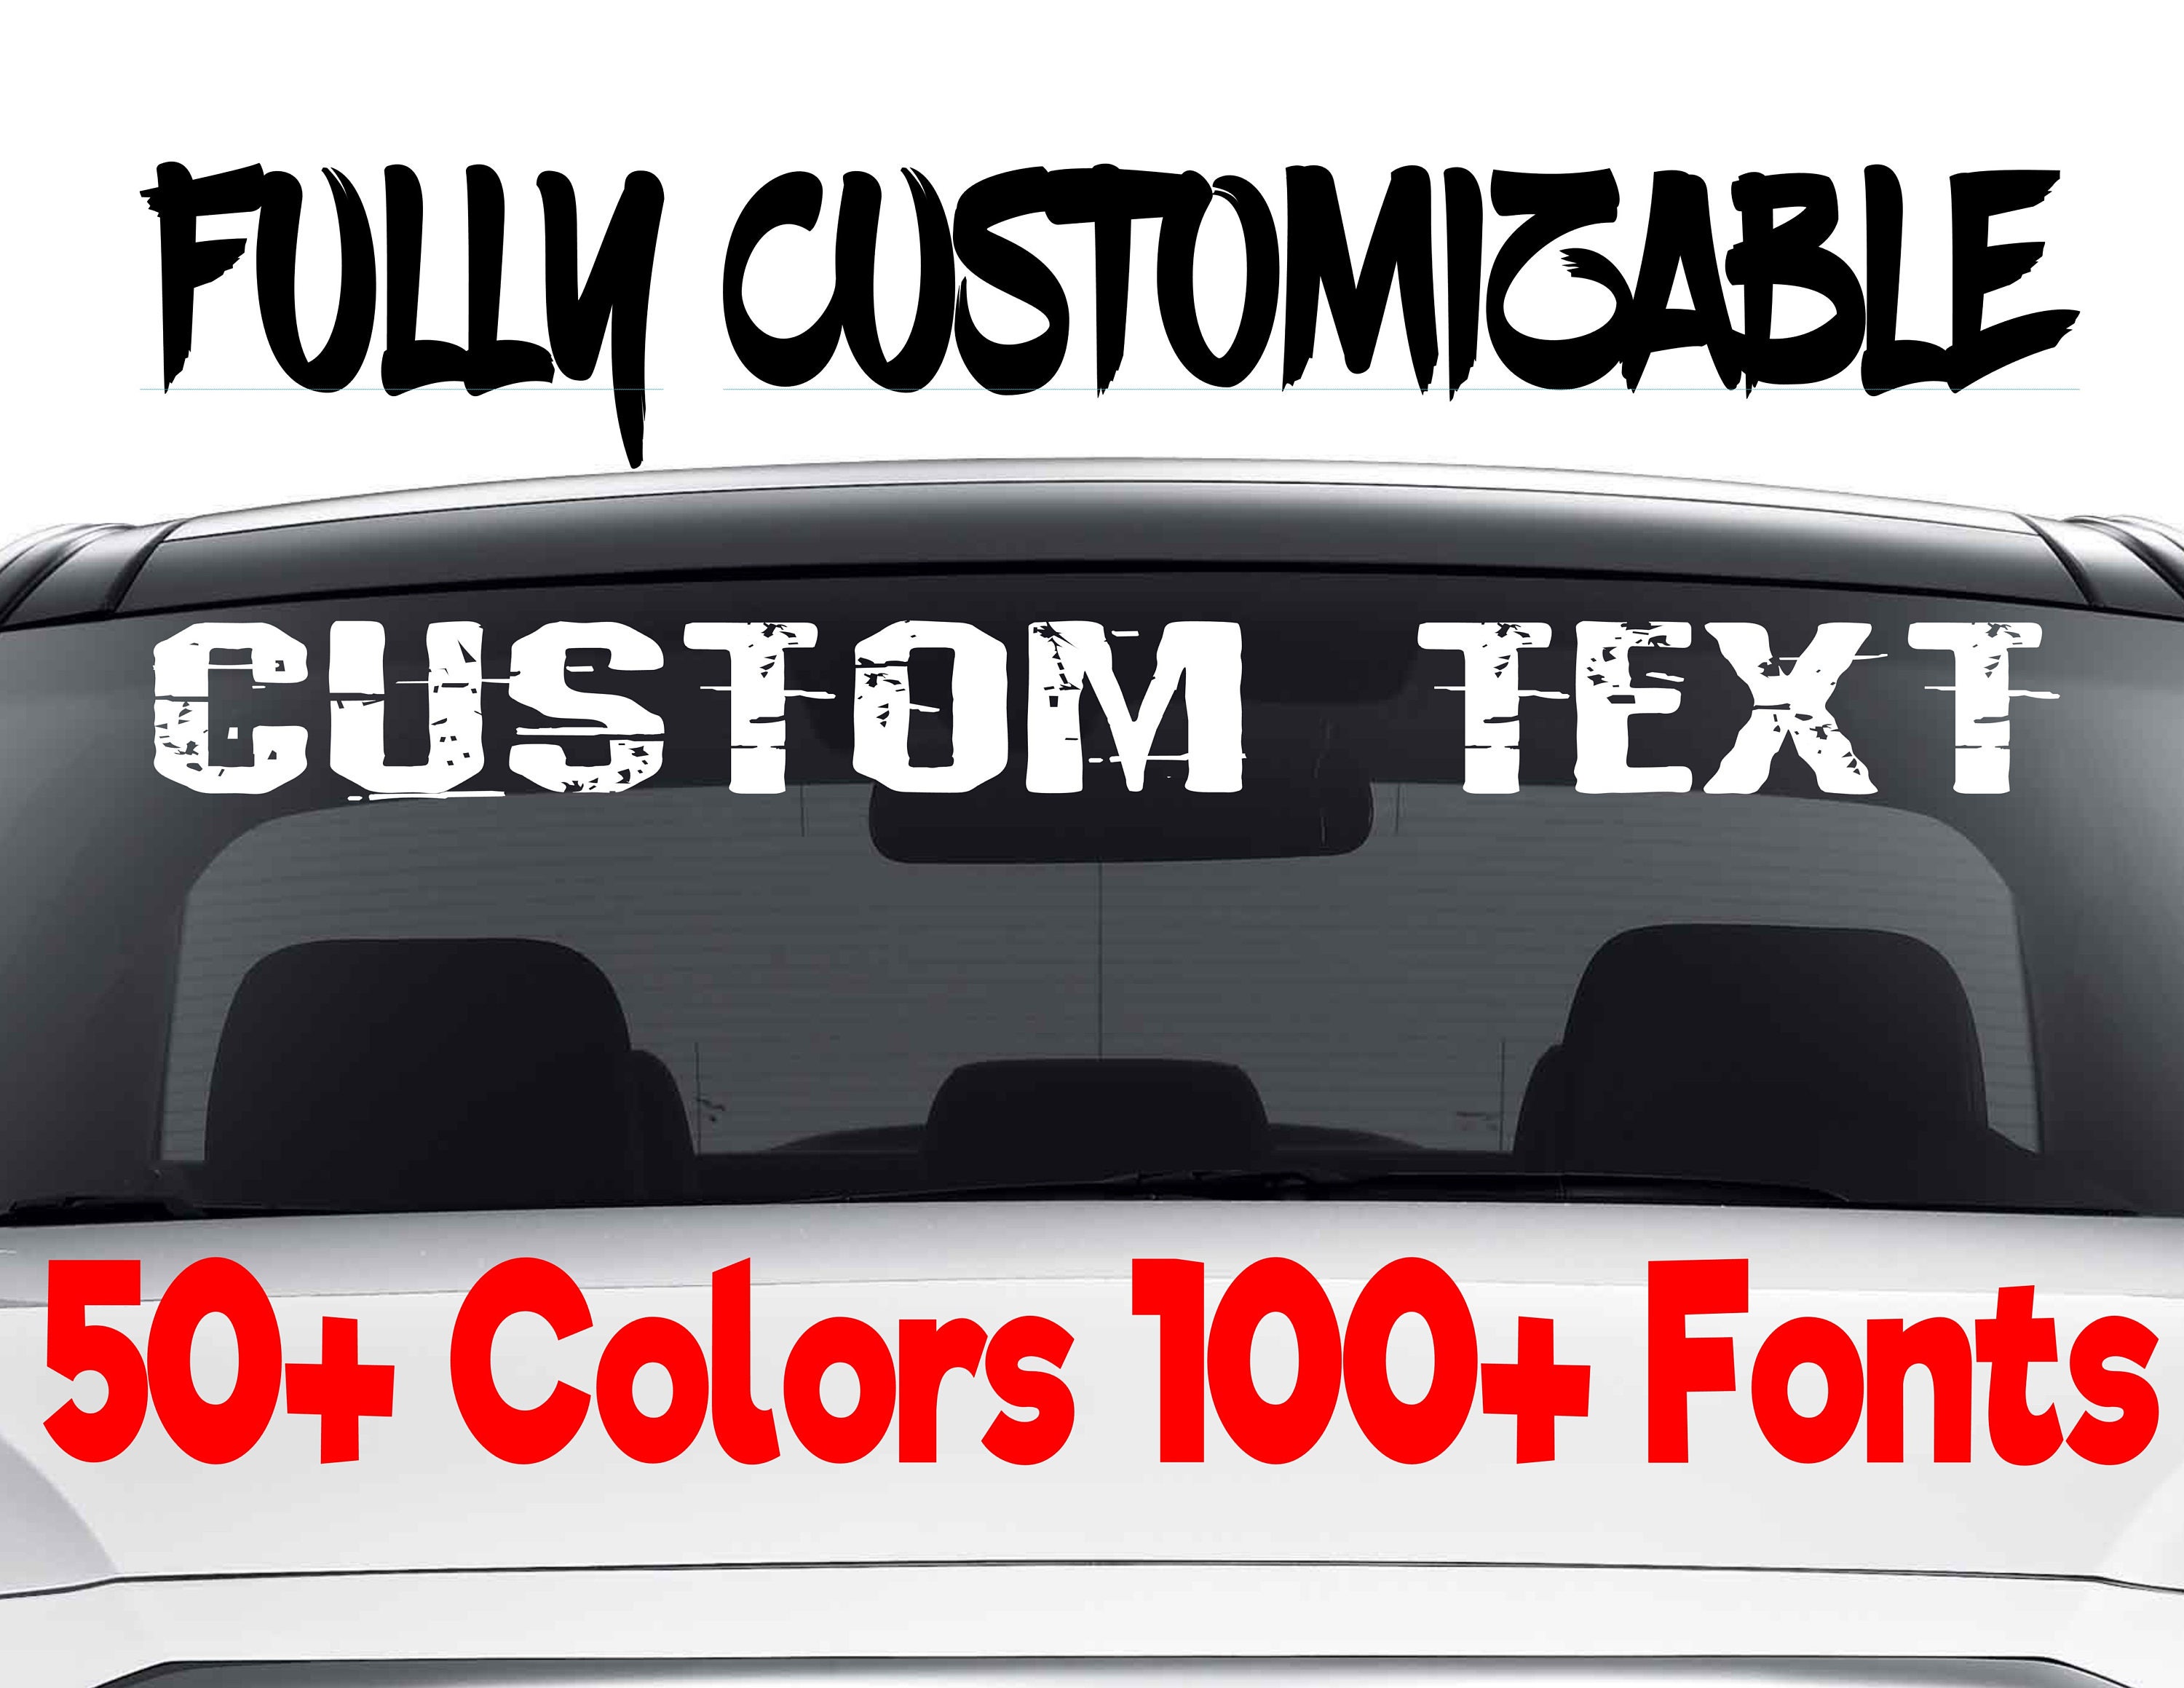 4" High Custom Vinyl Lettering Personalized Text Wall Window Car Sticker Decal 